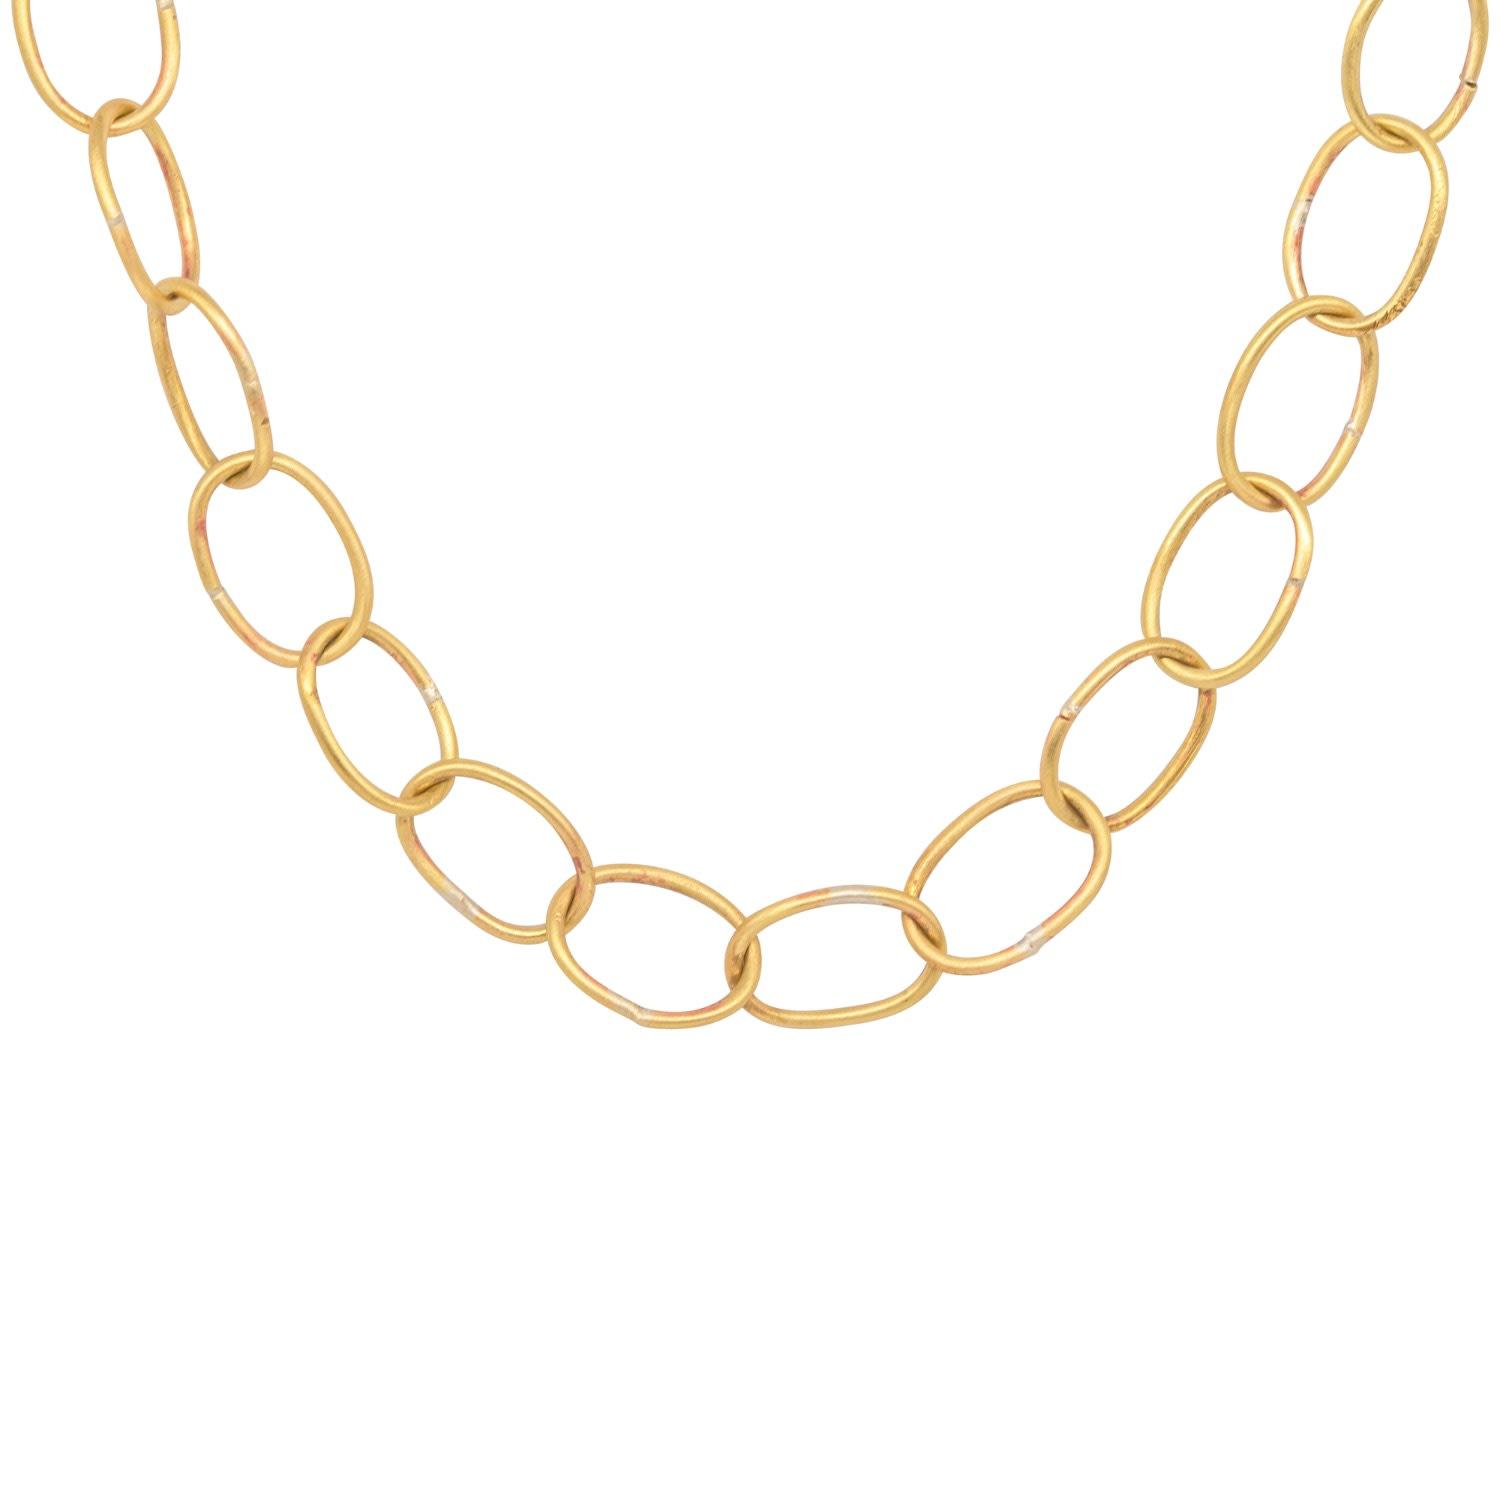 Lily Flo Jewellery 9k Cherish Oval Chain Gold Necklace in Metallic - Lyst